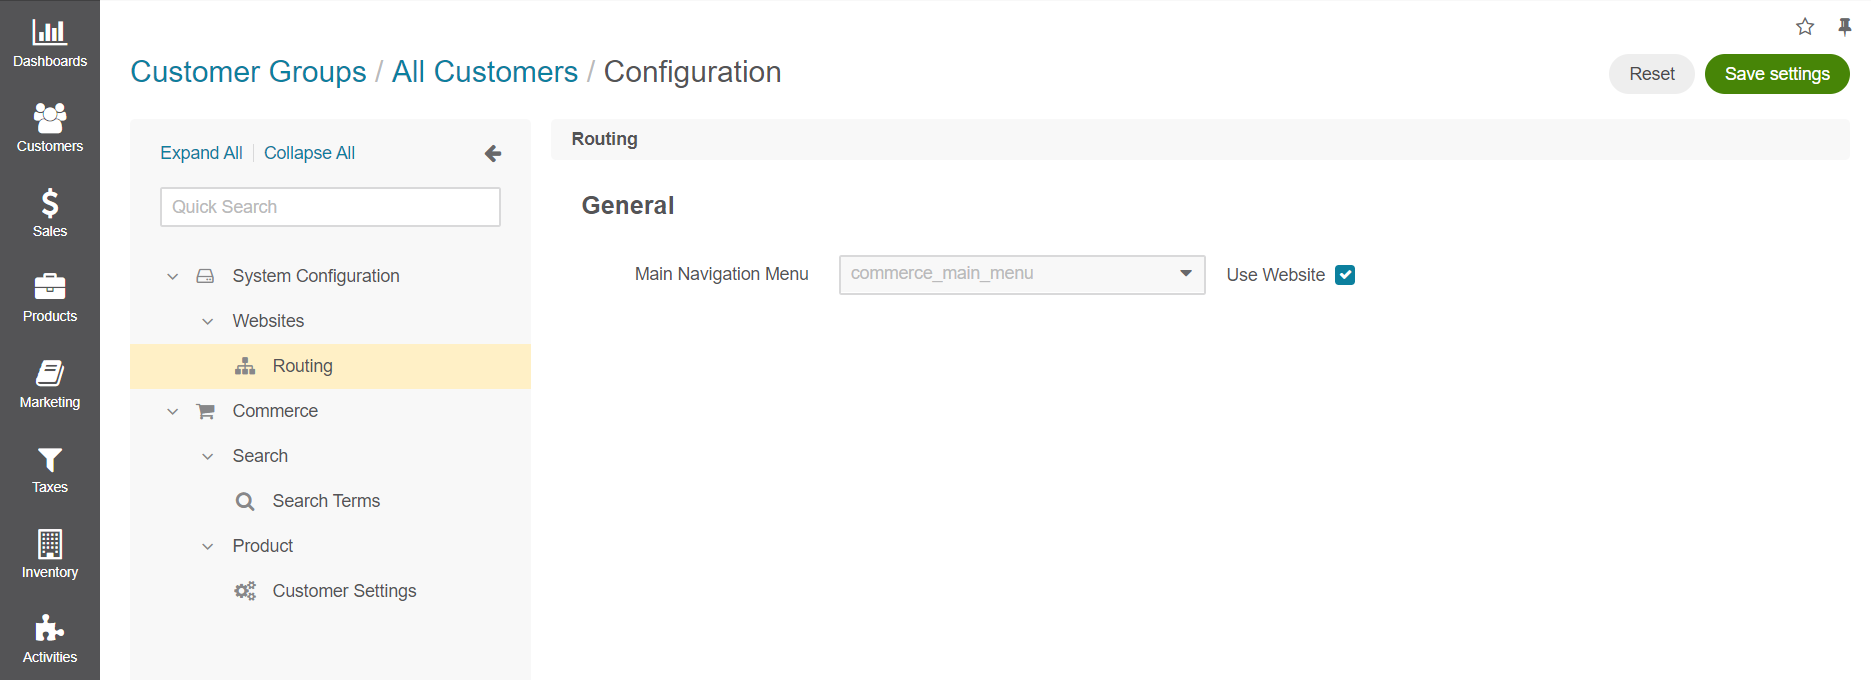 Customer group routing configuration settings